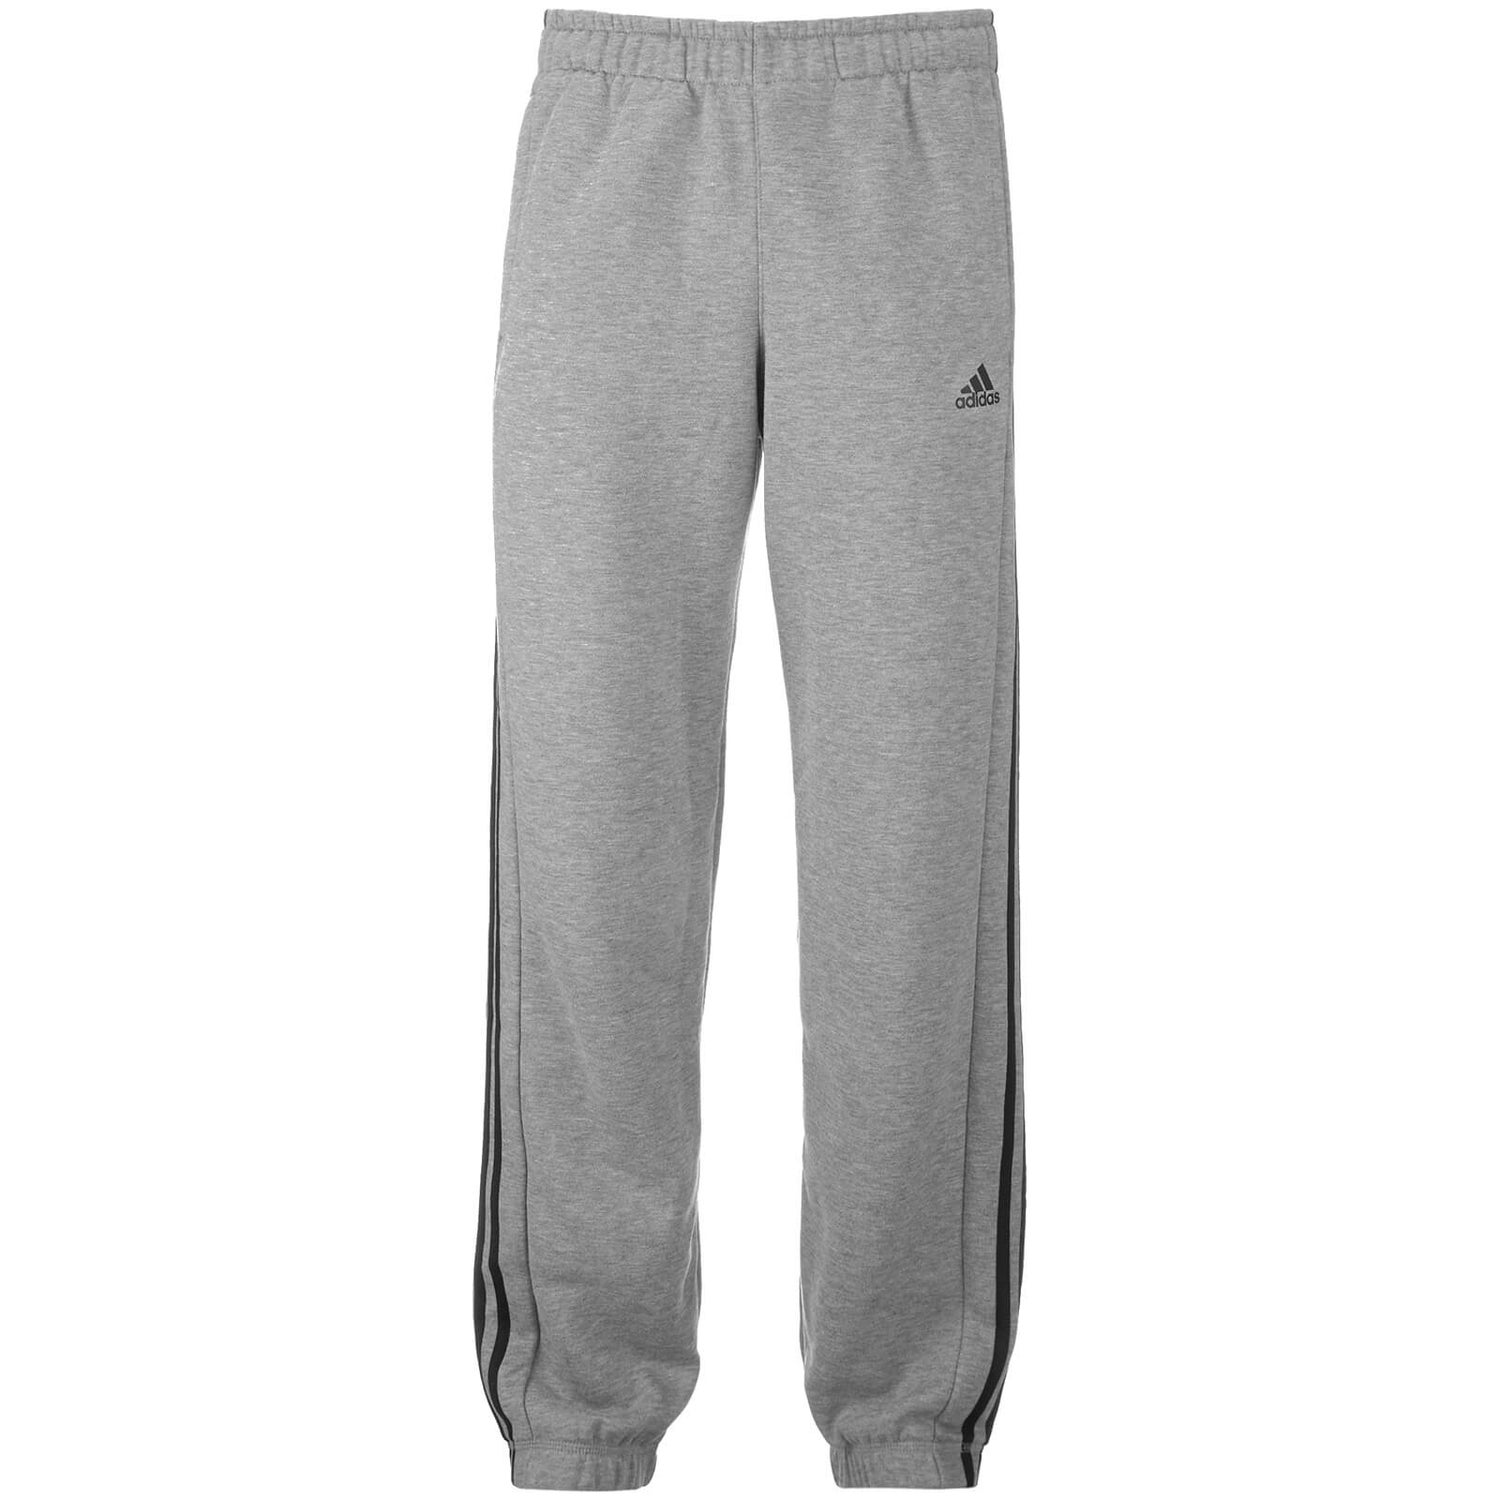 Adidas Men's Tiro Track Pants - Black / Dgh Solid Grey — Just For Sports